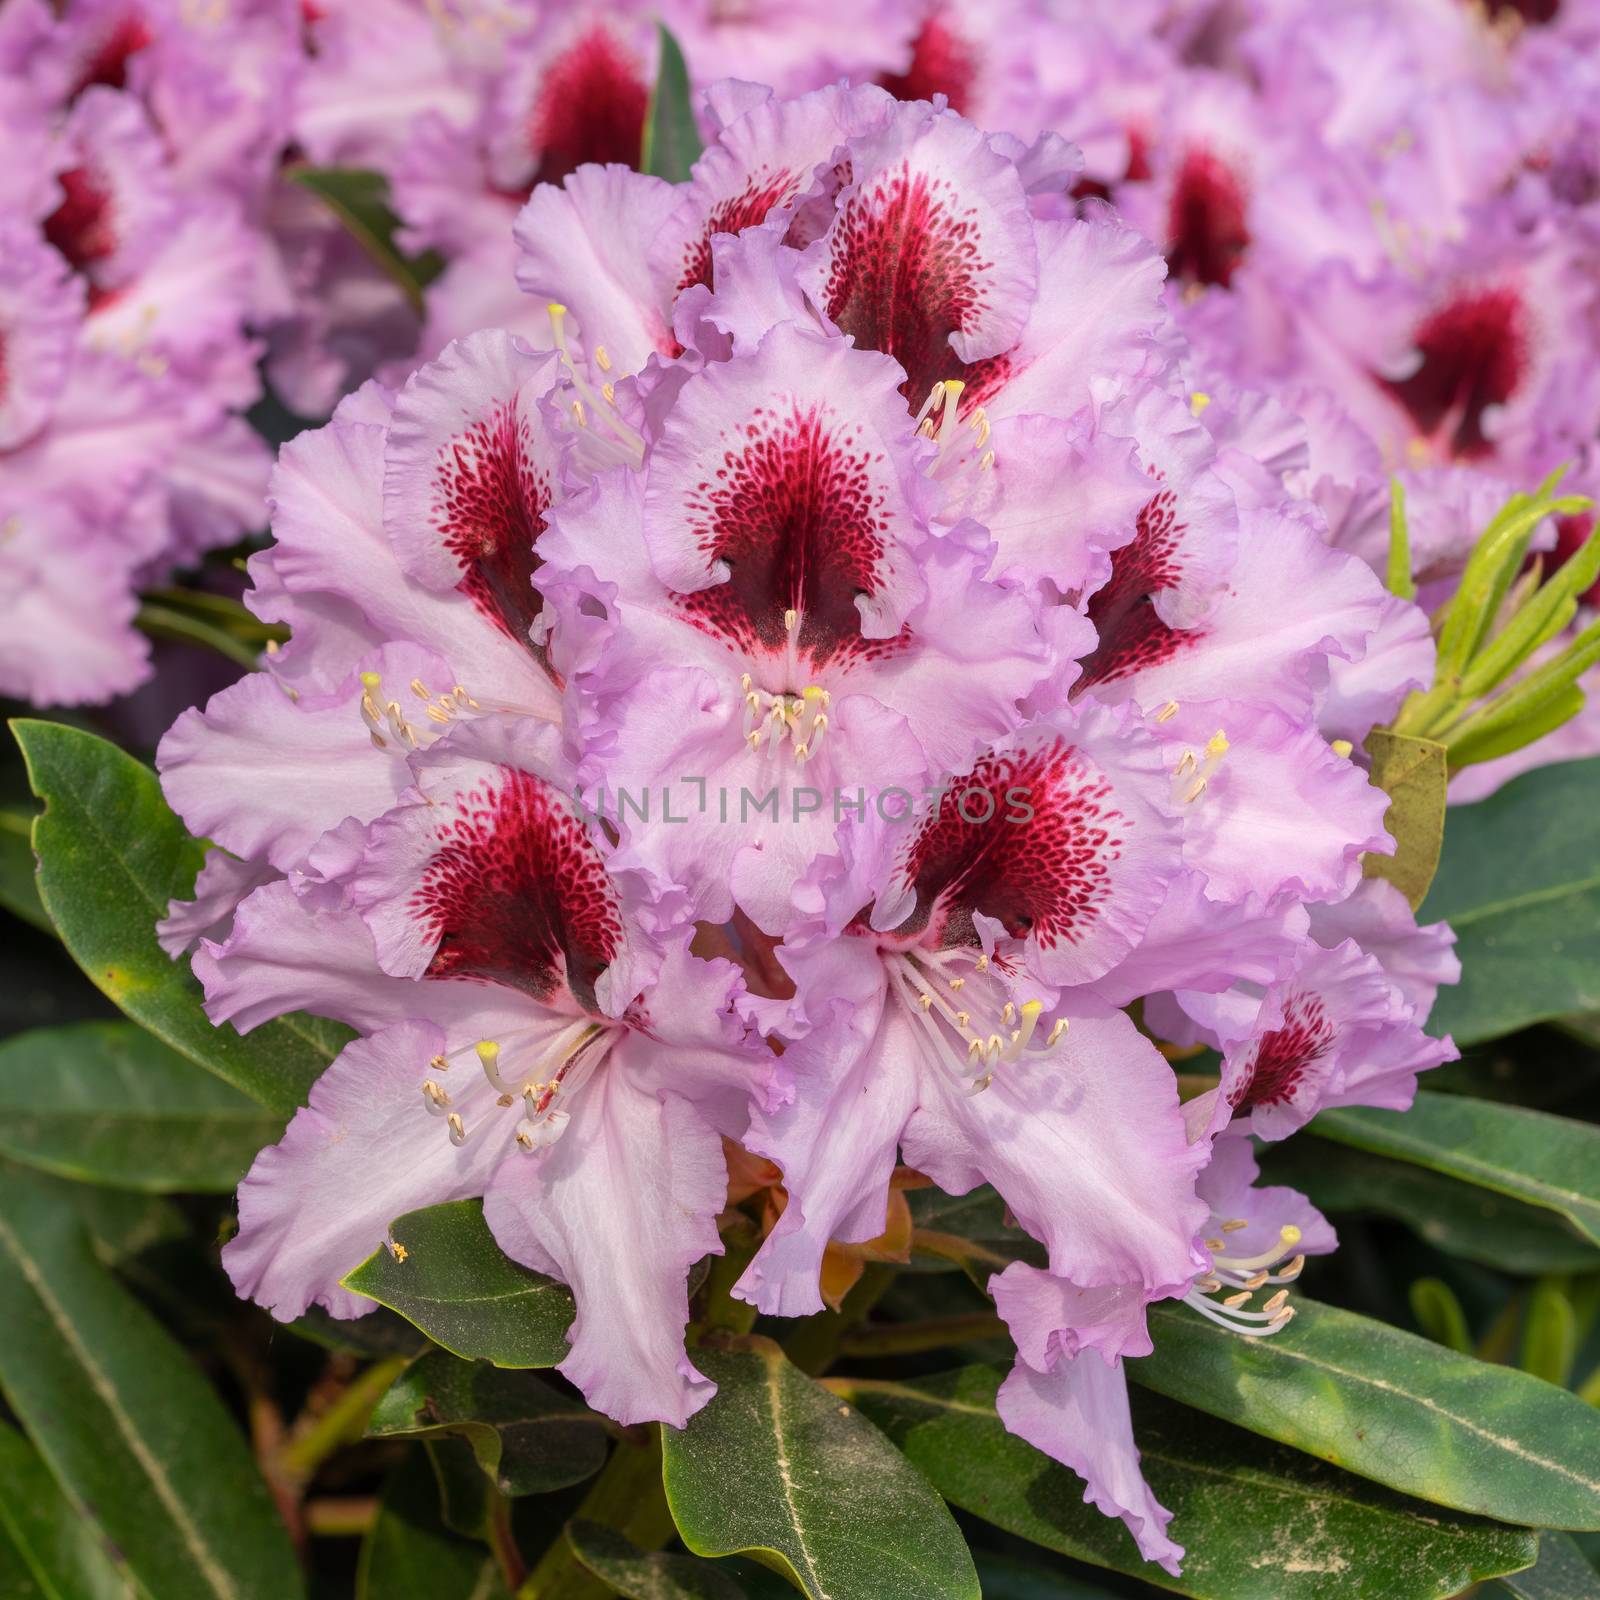 Rhododendron Hybrid Kabarett, Rhododendron hybrid, close up of the flower head